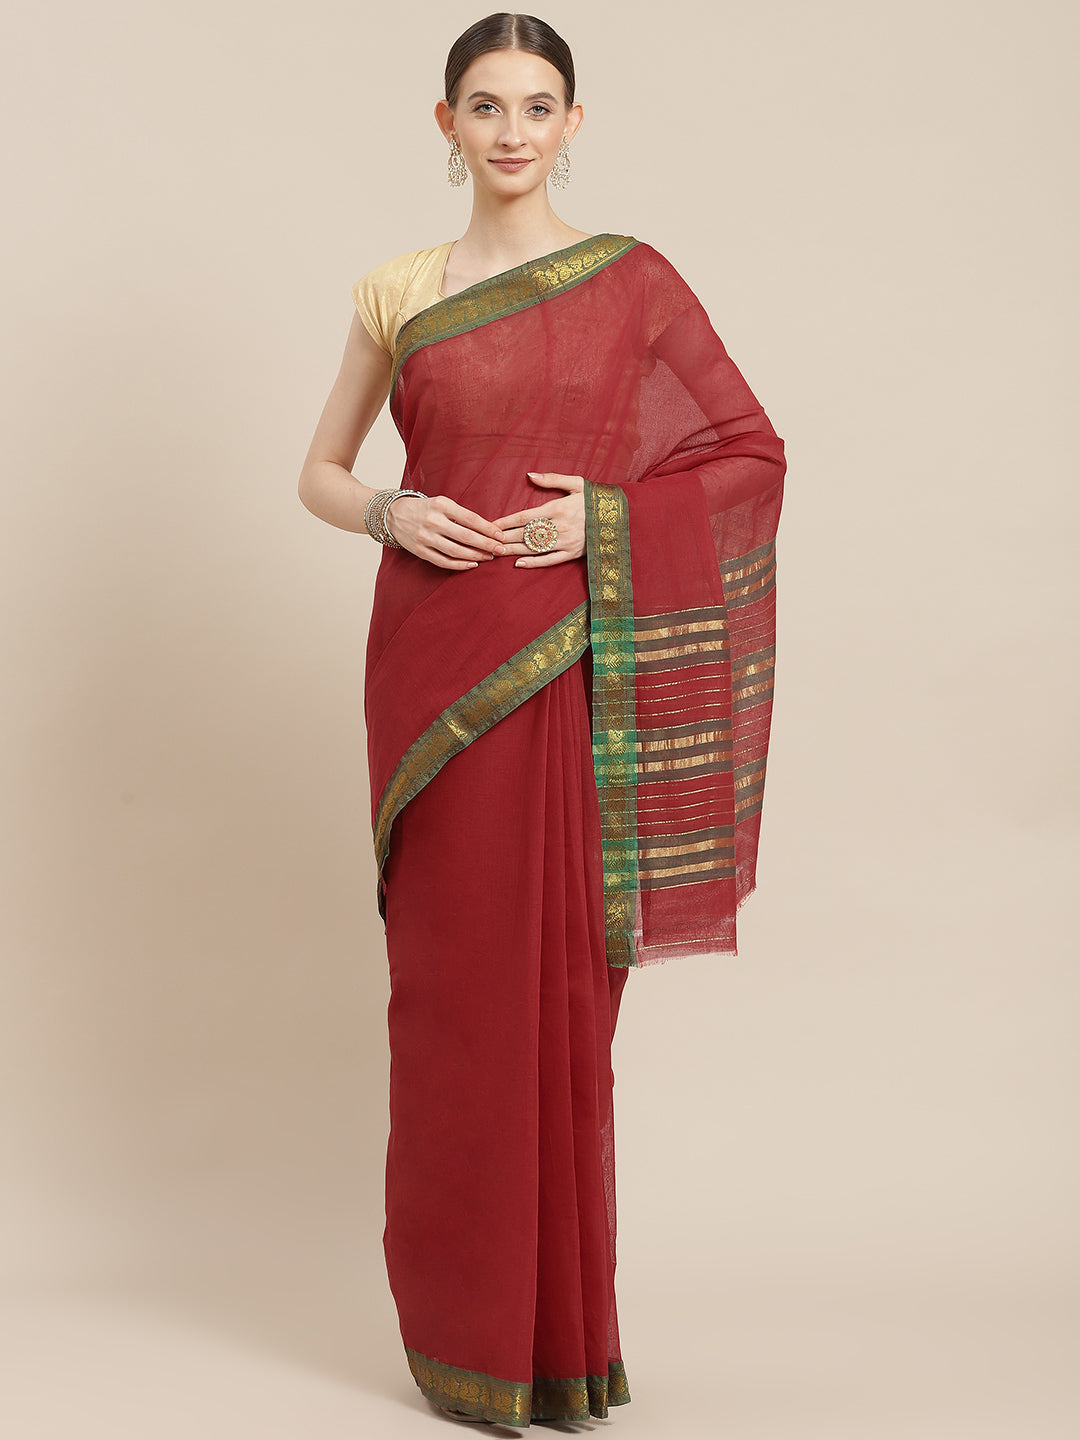 Ishin Women's Cotton Blend Maroon Solid Woven Saree With Blouse Piece